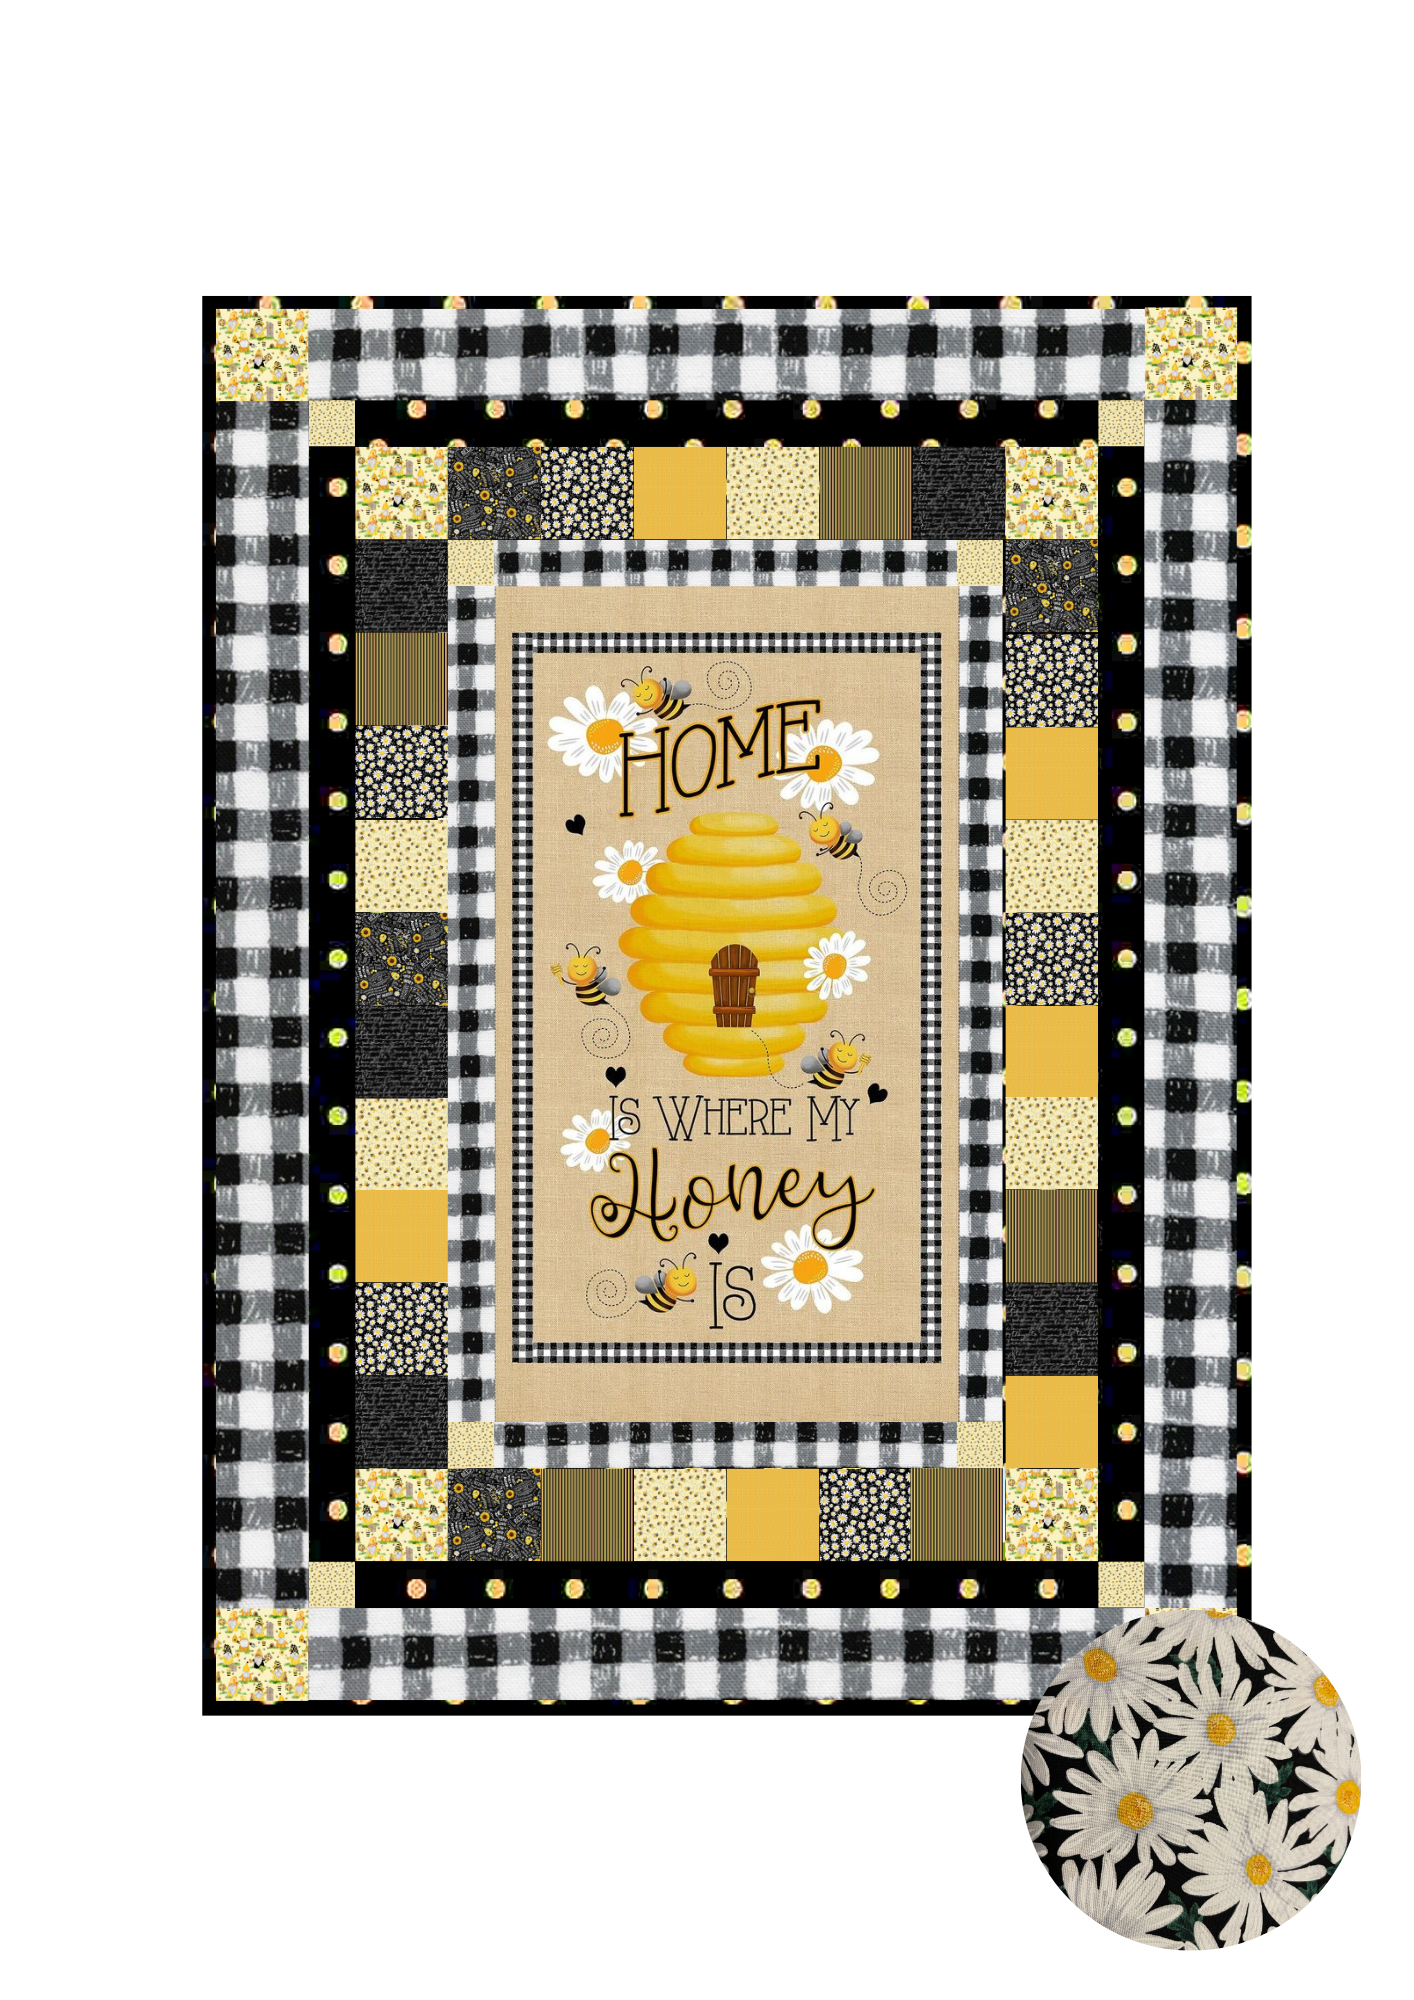 Timeless Treasures Quilt Kit Kit w/backing Large Daisies Beginner Bee Hive Quilt Kit Timeless Treasures Home Is Where My Honey Is DIY Panel Quilt